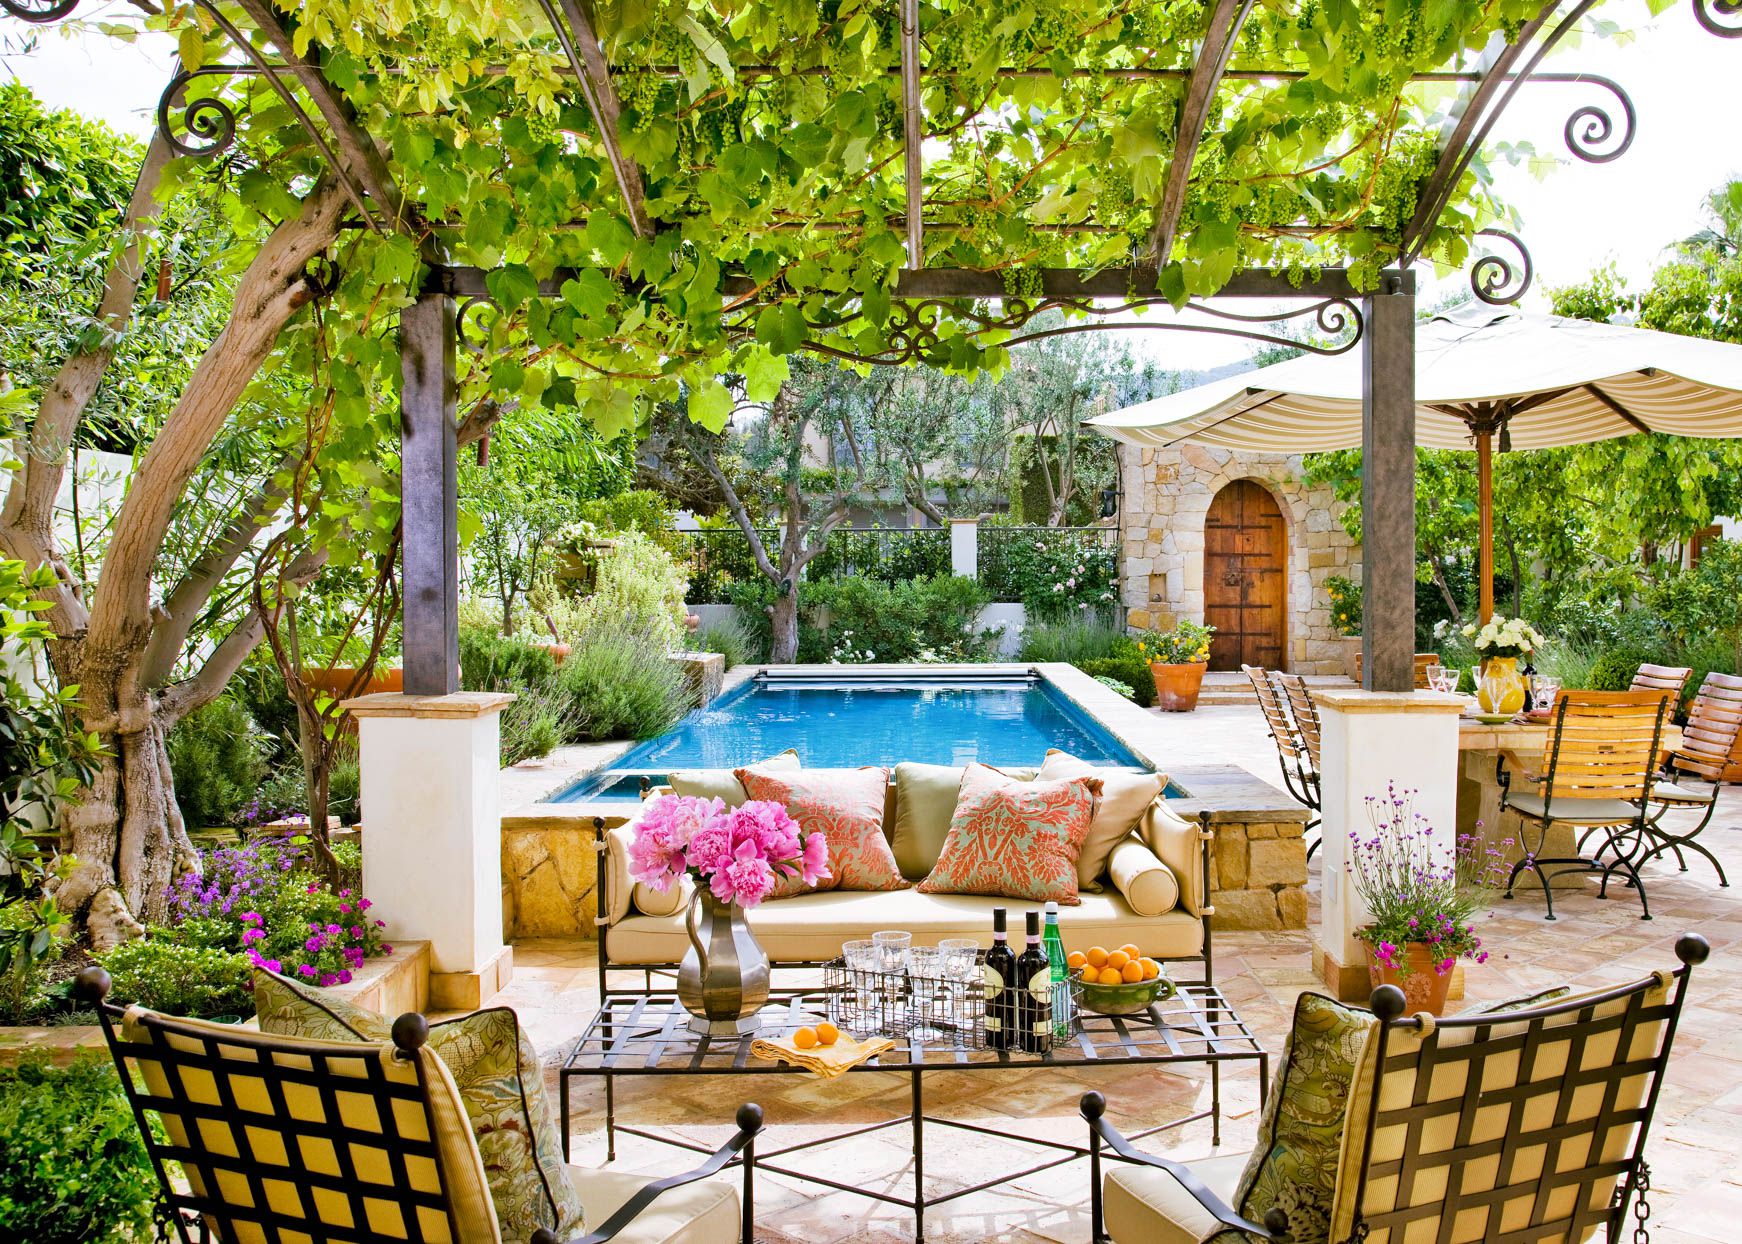 How to Turn Your Outdoor Space into a Backyard Oasis？